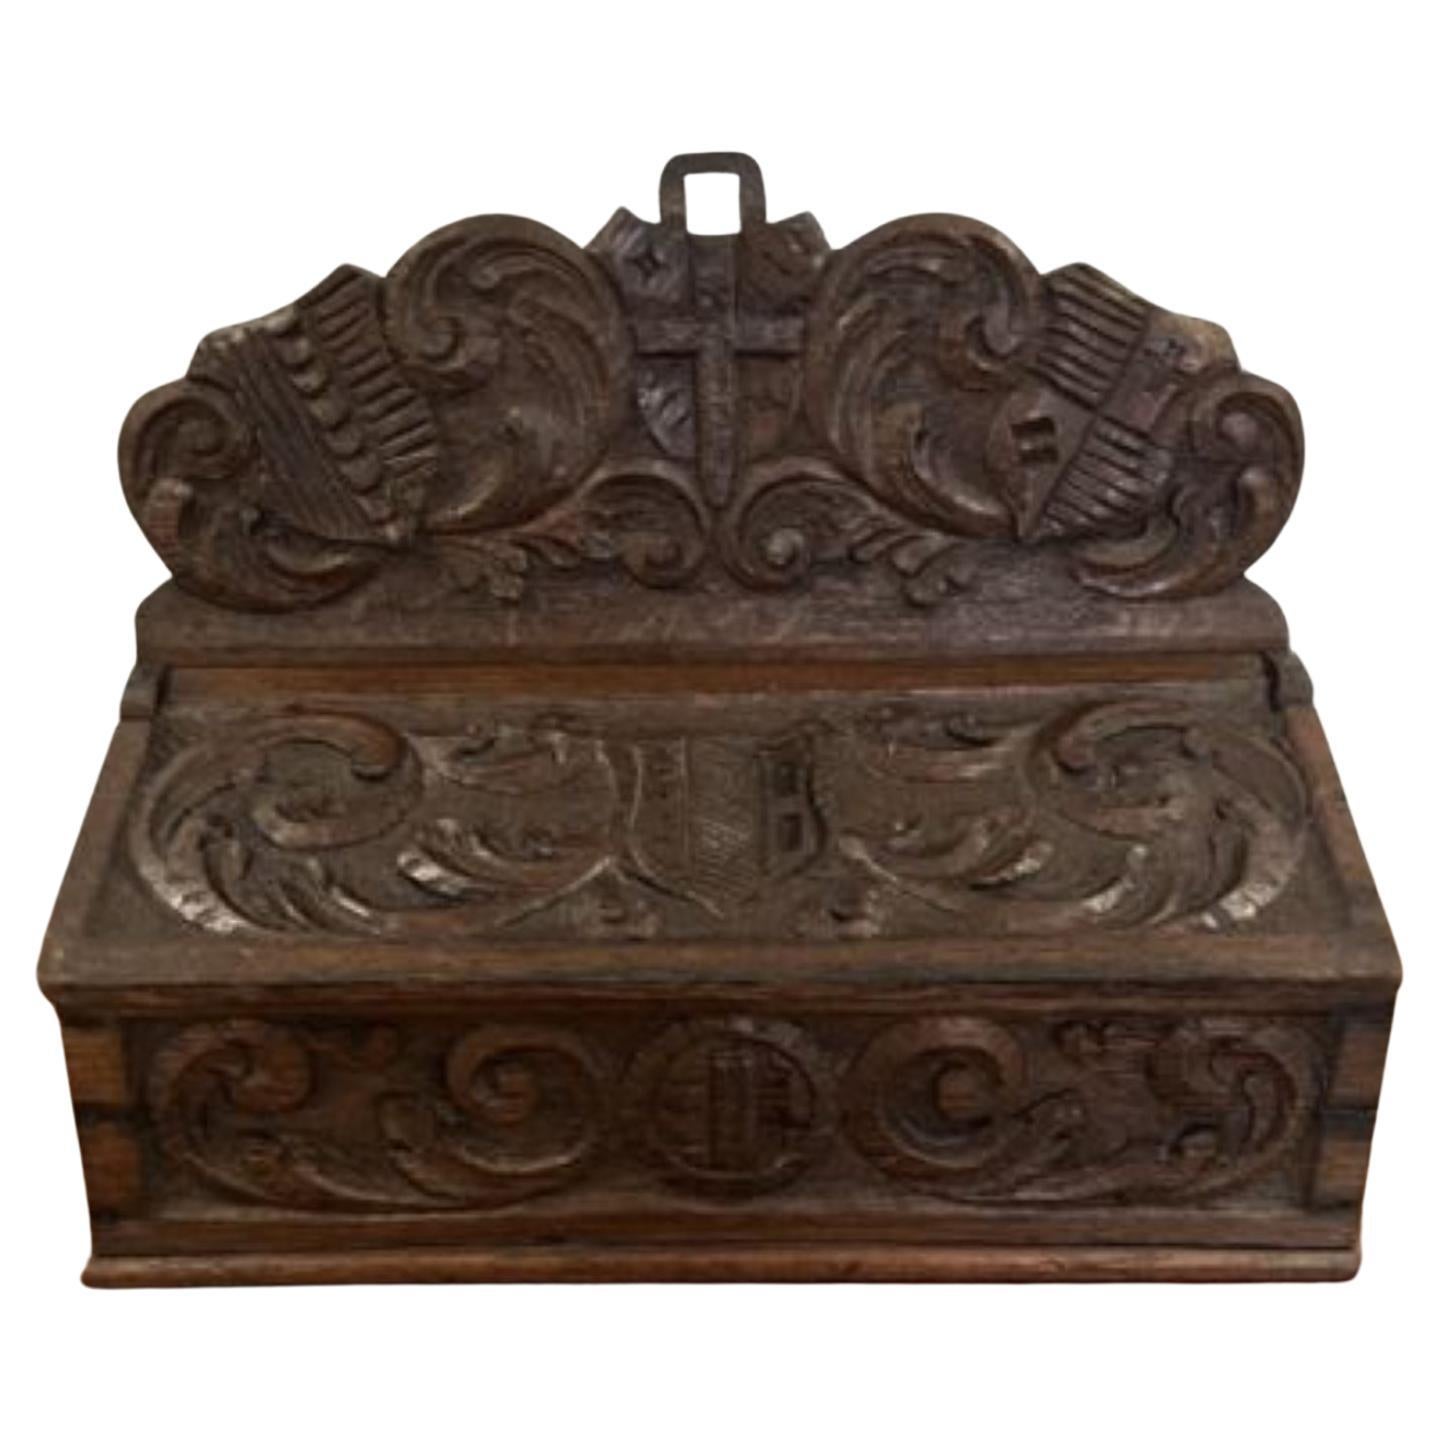 Quality antique Victorian carved oak candle box